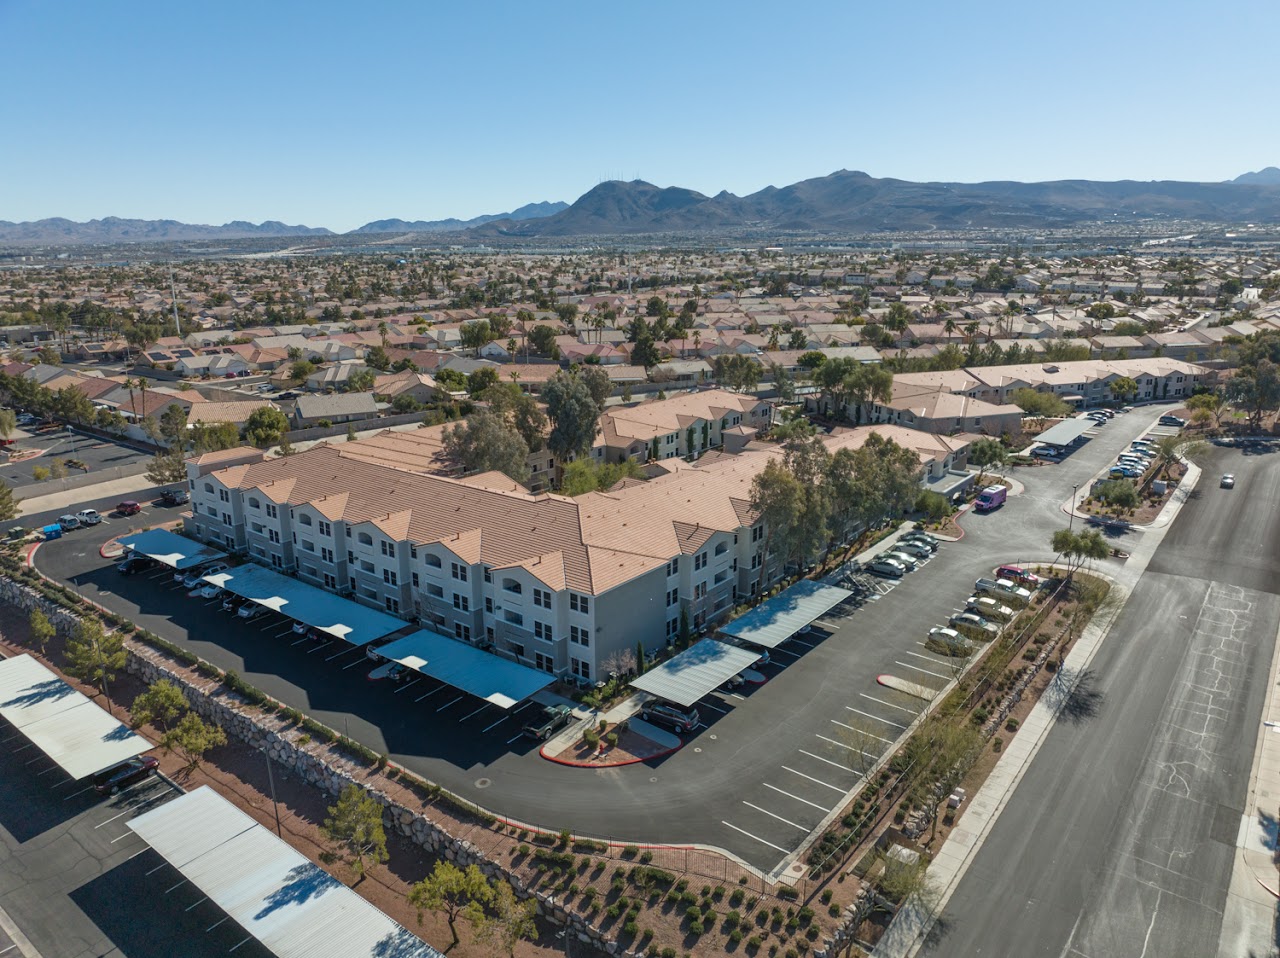 Photo of ANNABELLE PINES II. Affordable housing located at 320 ANNABELLE LANE HENDERSON, NV 89014